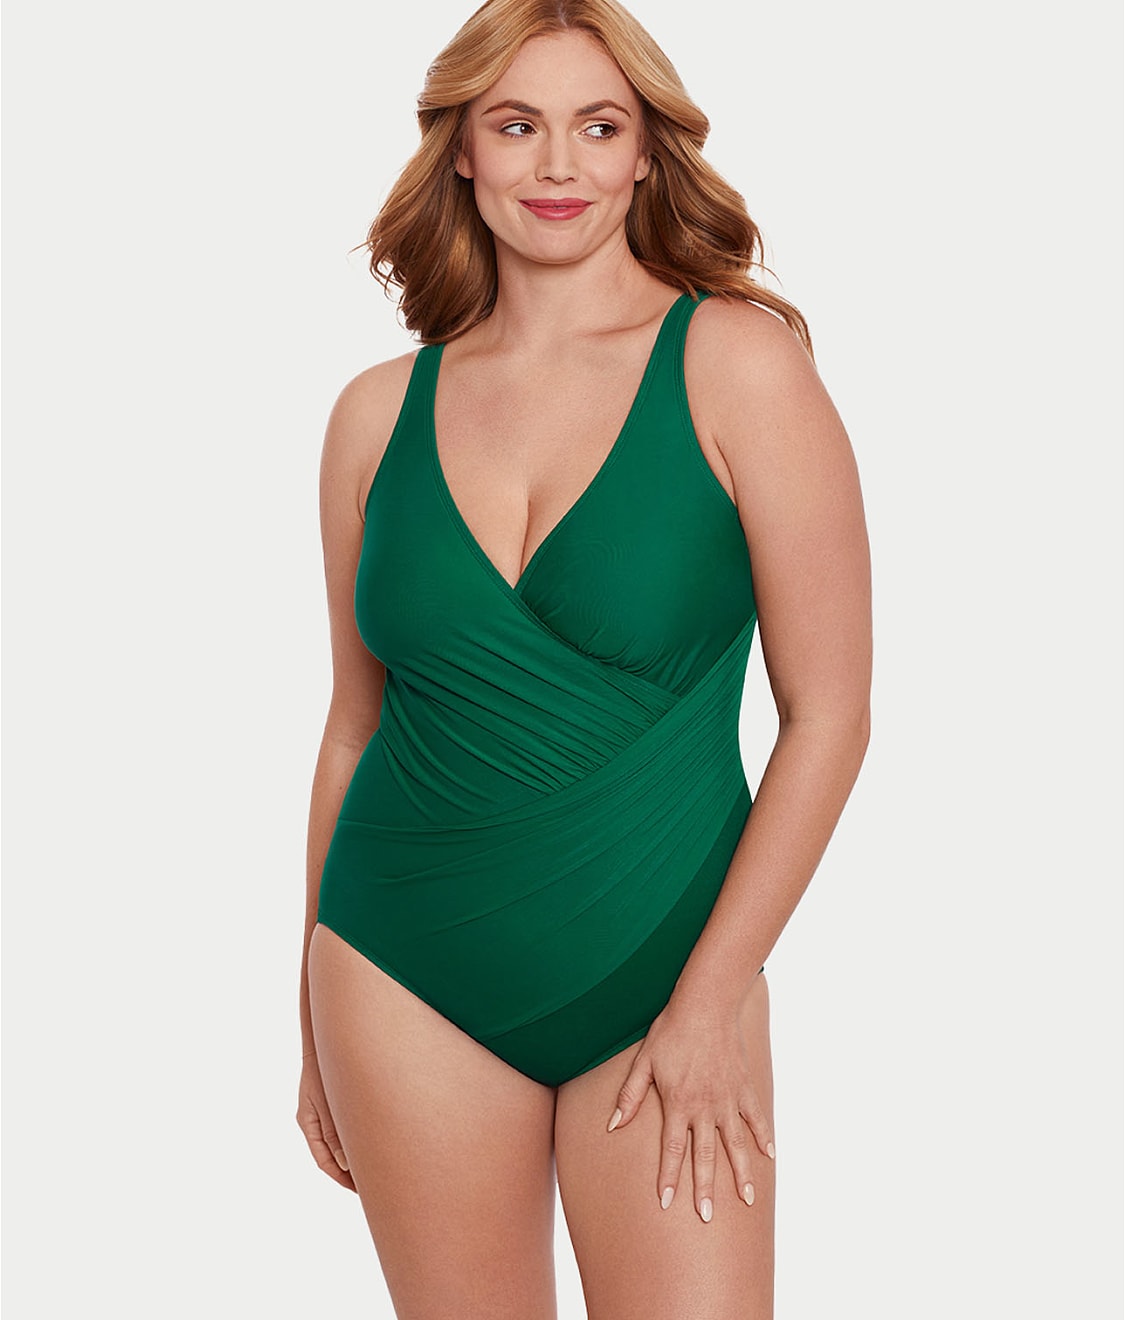 Miraclesuit swimwear review and try on 